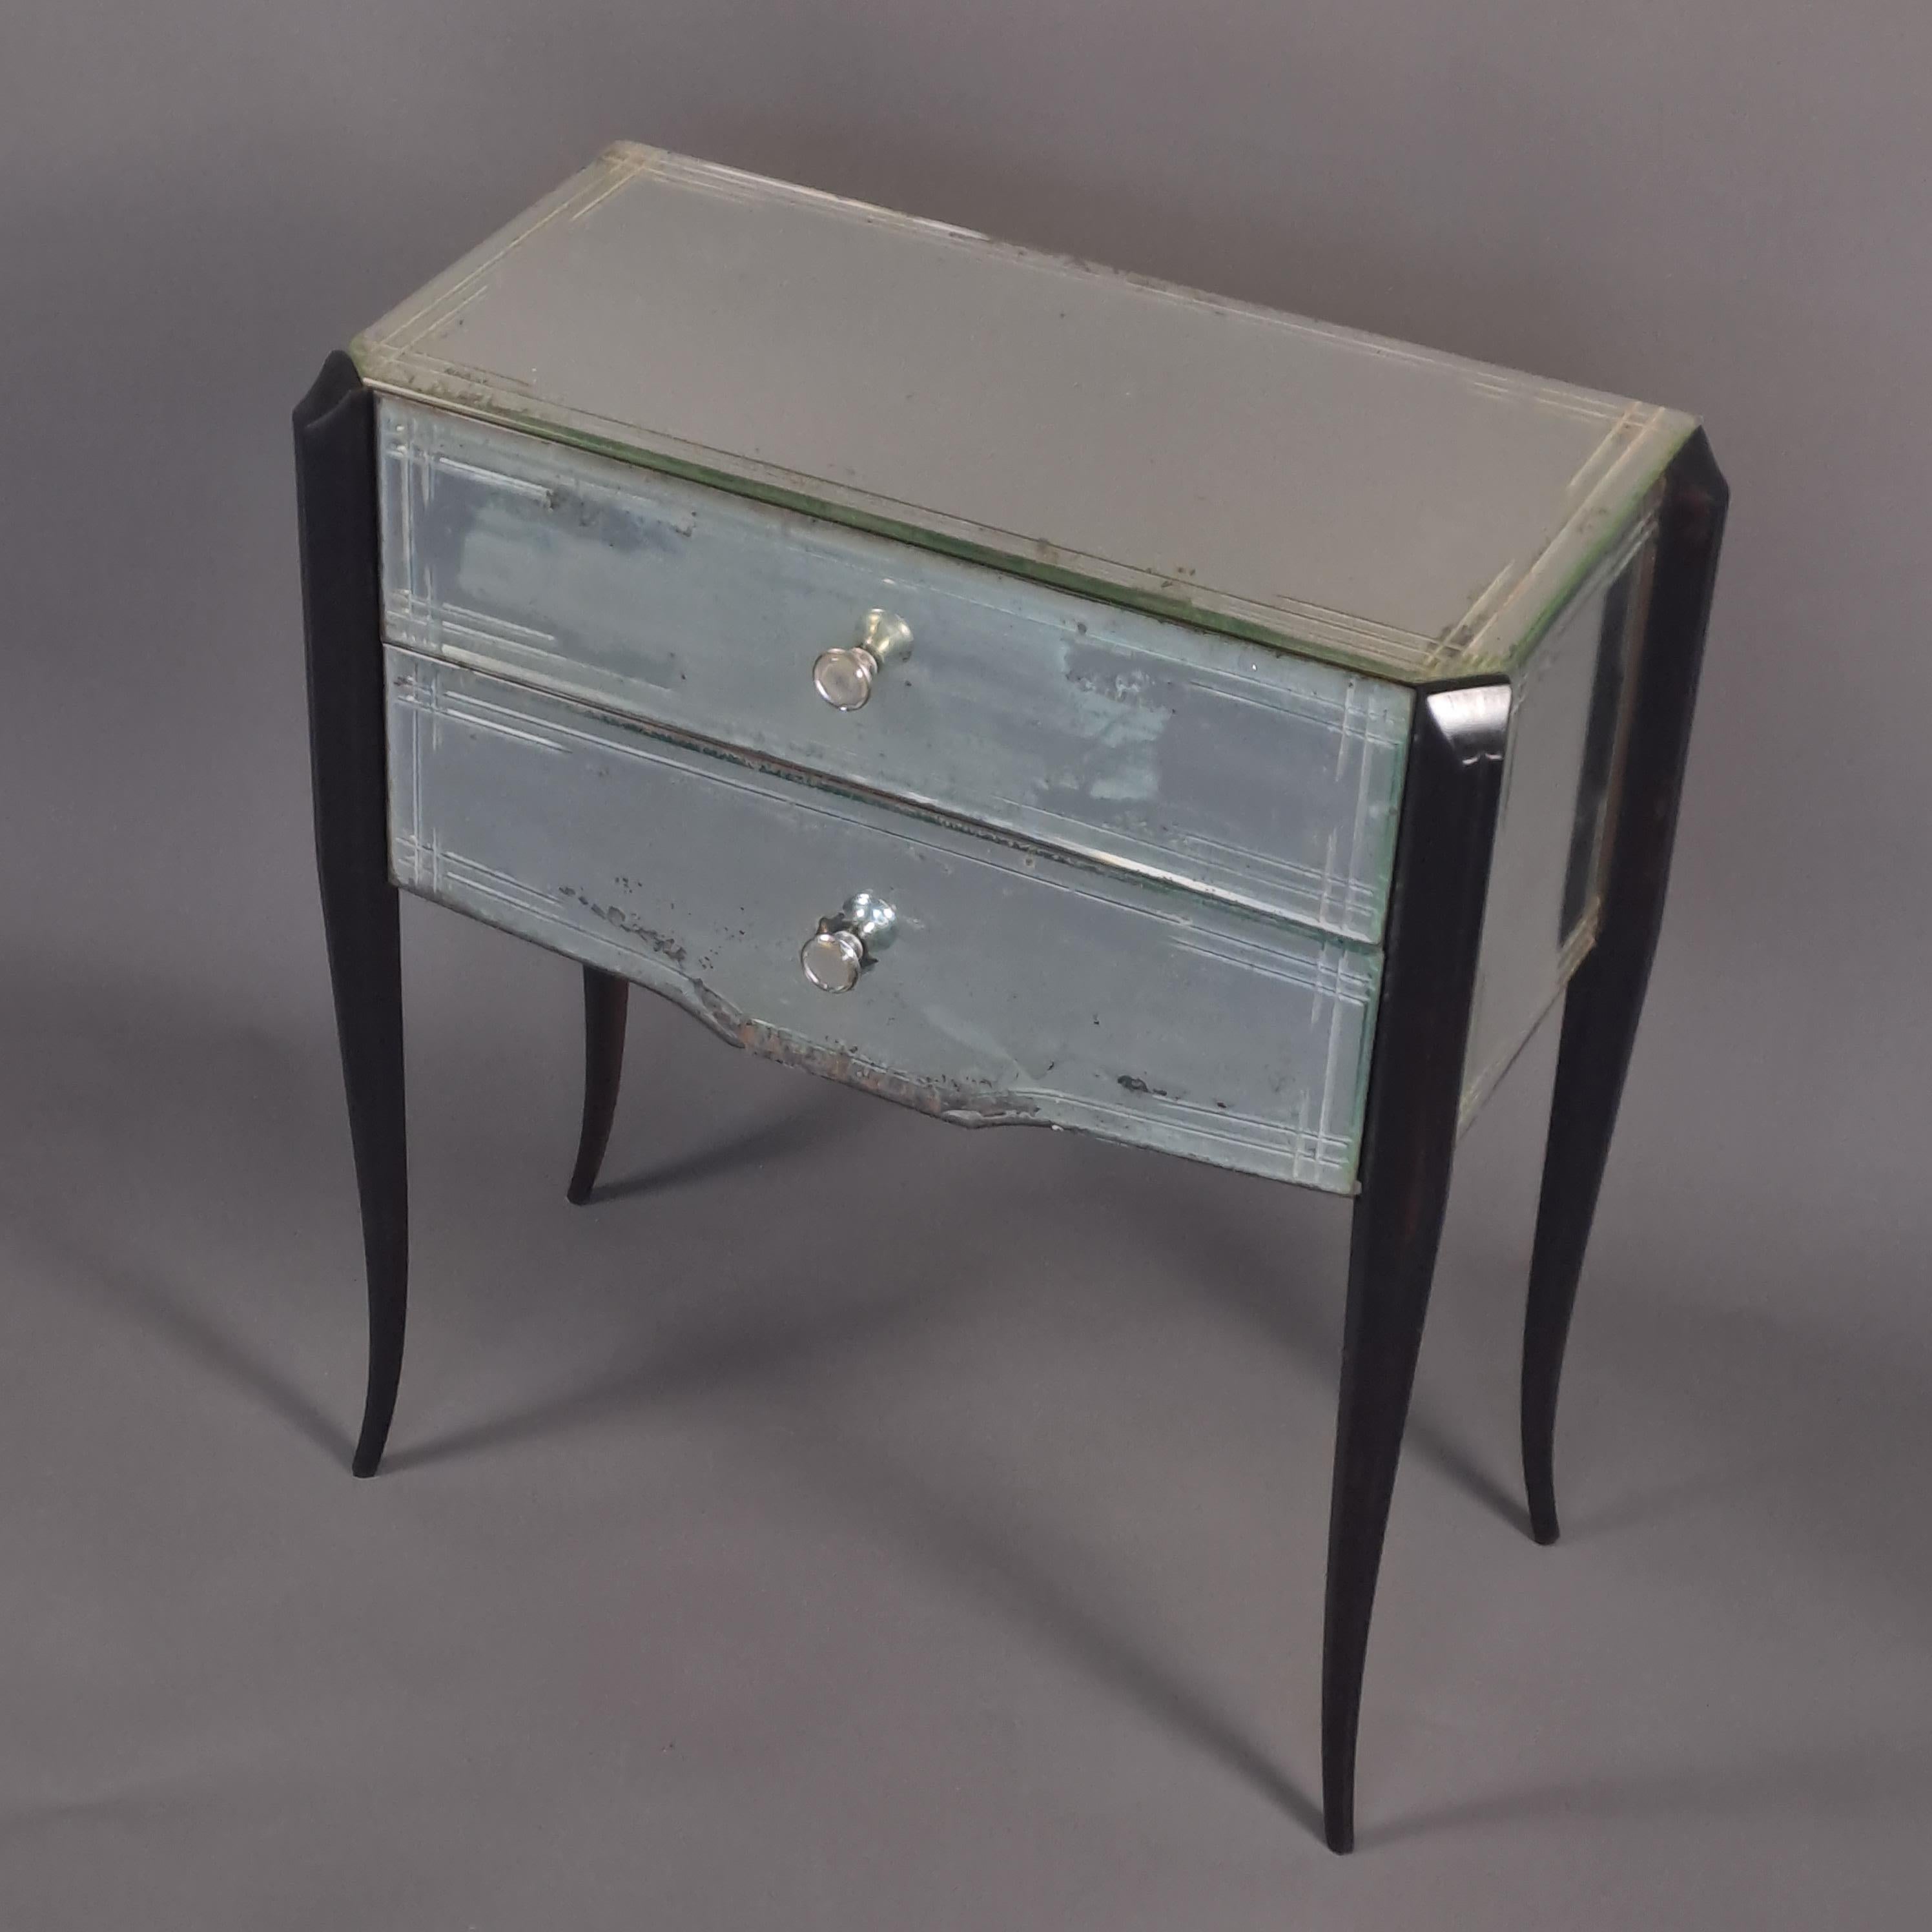 Amusing little in-between chest of drawers in bevelled and chiseled glass, opening two drawers without crosspieces and resting on four elegantly arched stained wooden legs.

French work of good qualité from the 1950s: traditional assembly, dovetail